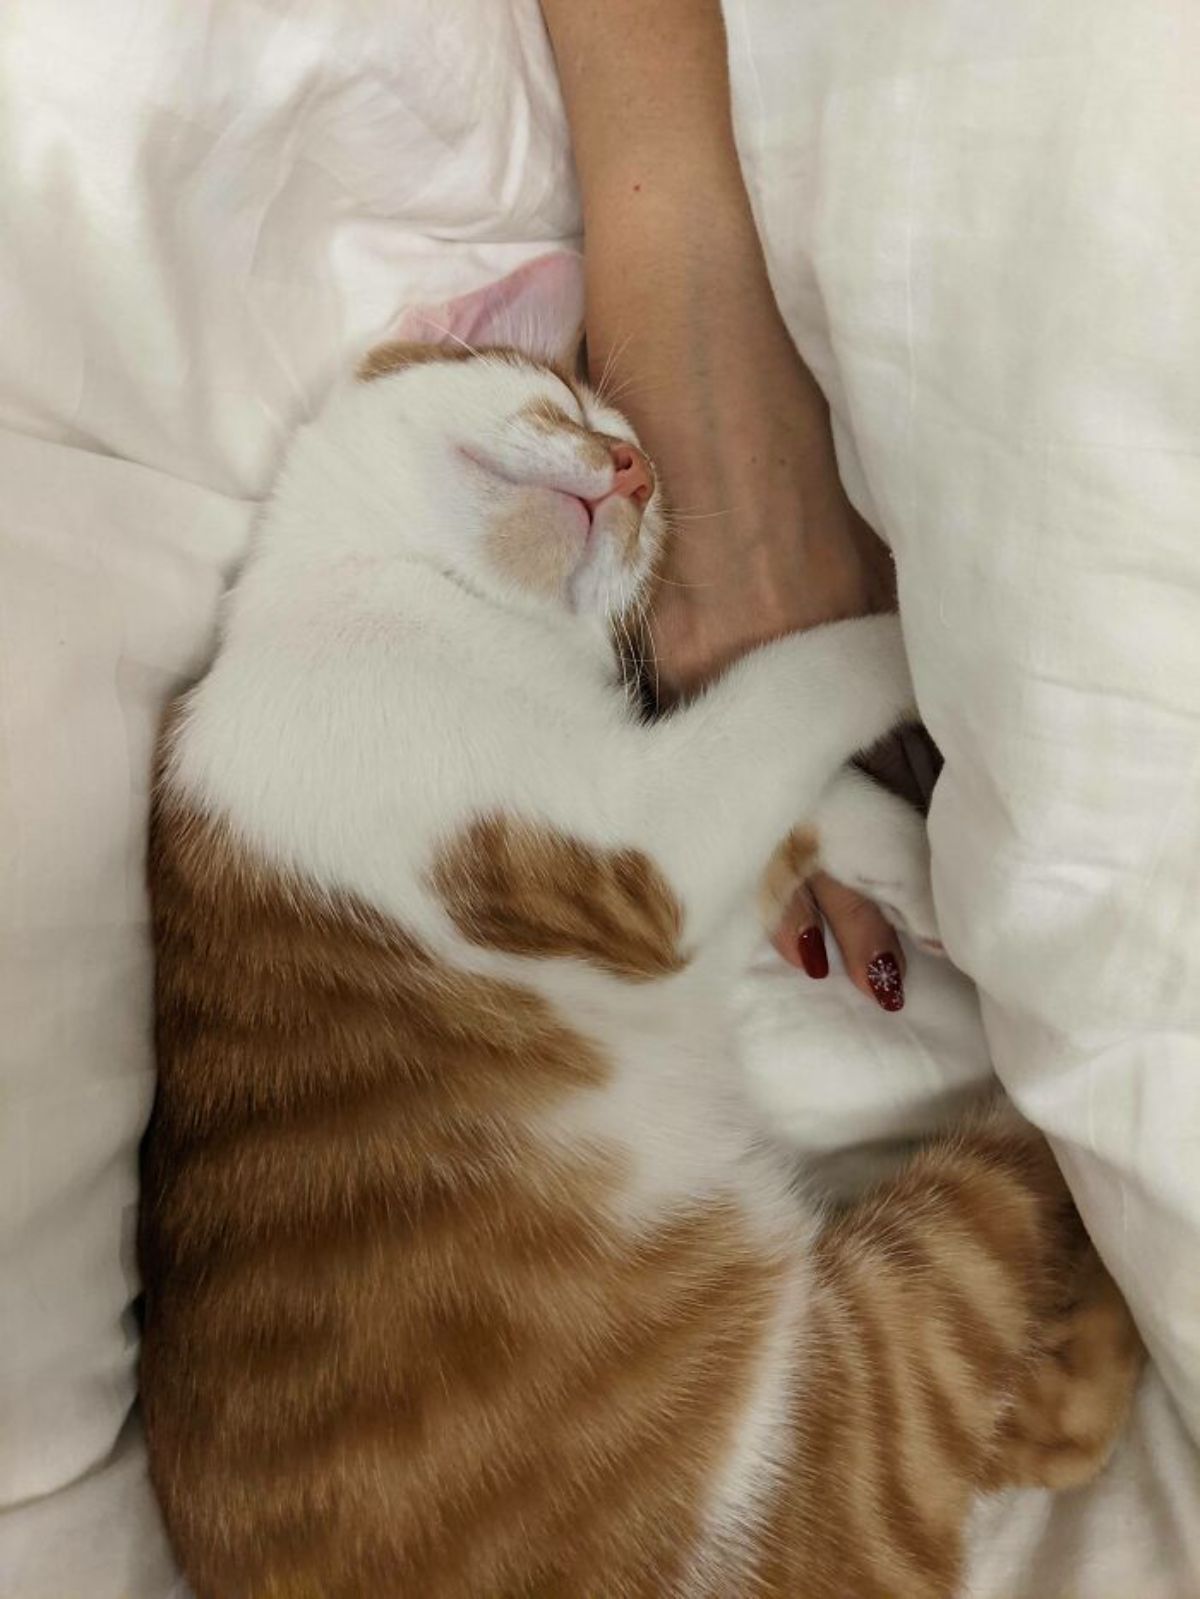 orange and white cat on a white bed hugging a woman's arm while sleeping